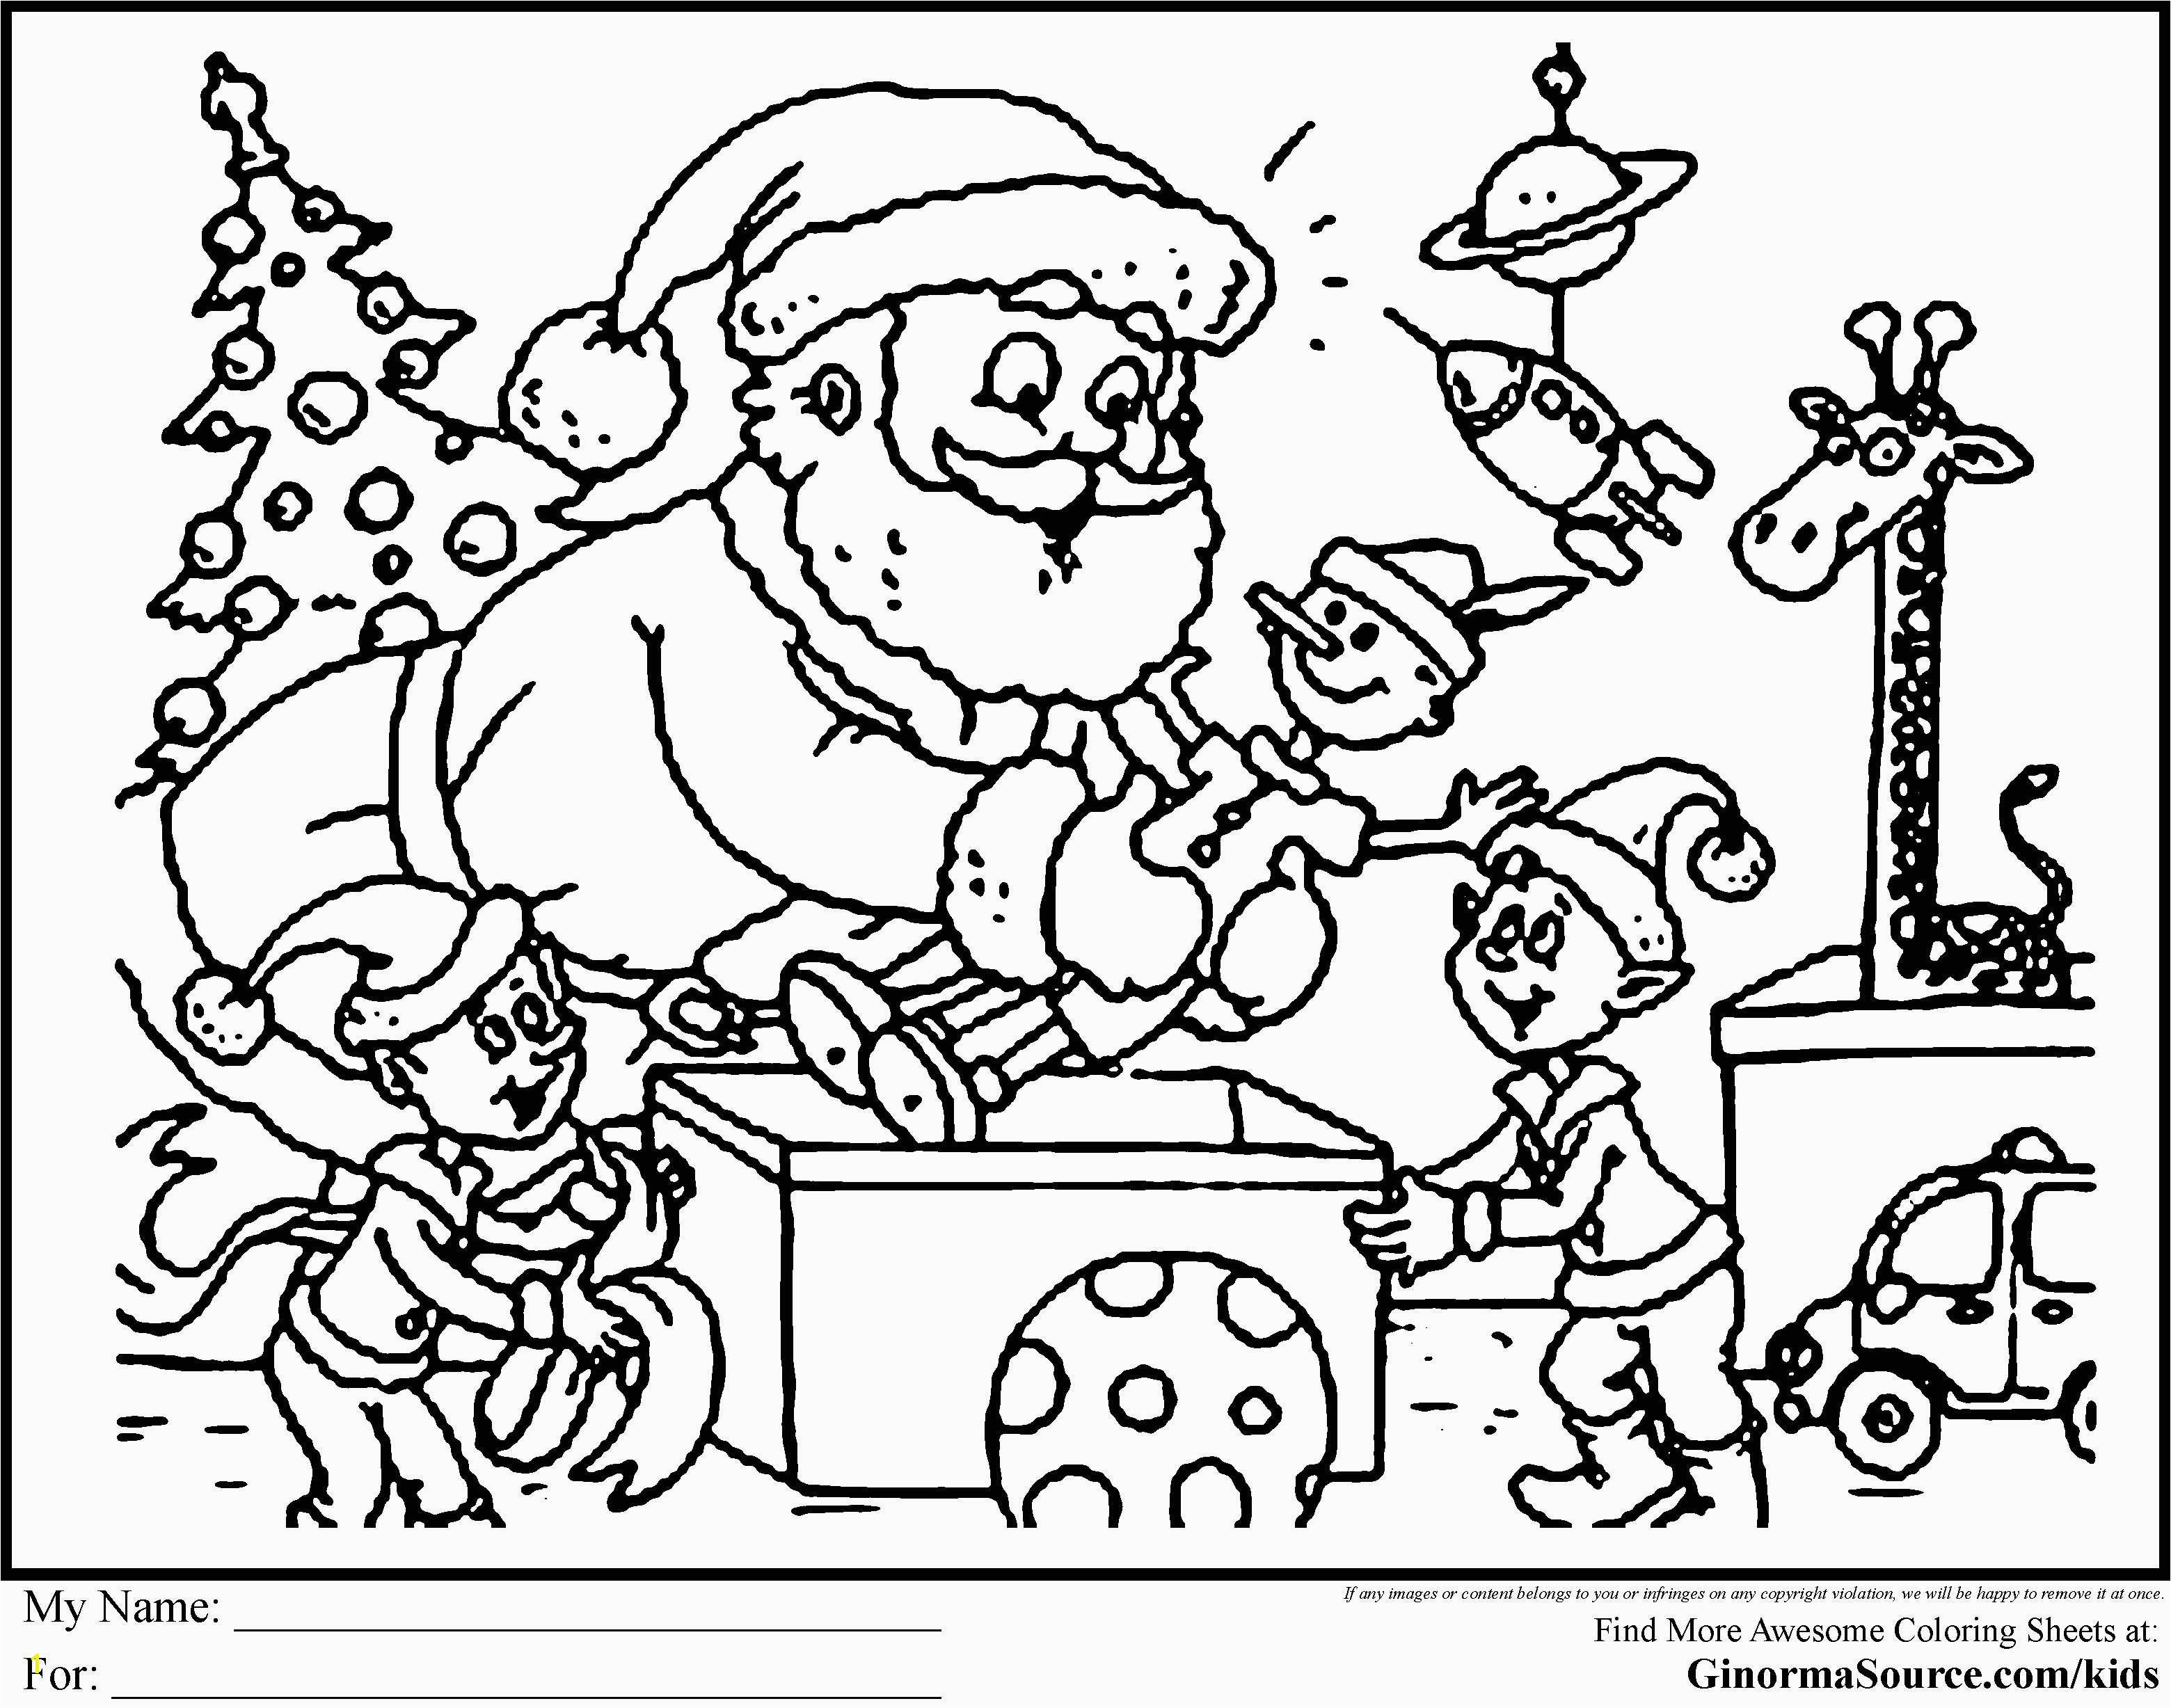 Youtuber Coloring Pages Print Coloring Pages for Free Coloring Pages Coloring Pages